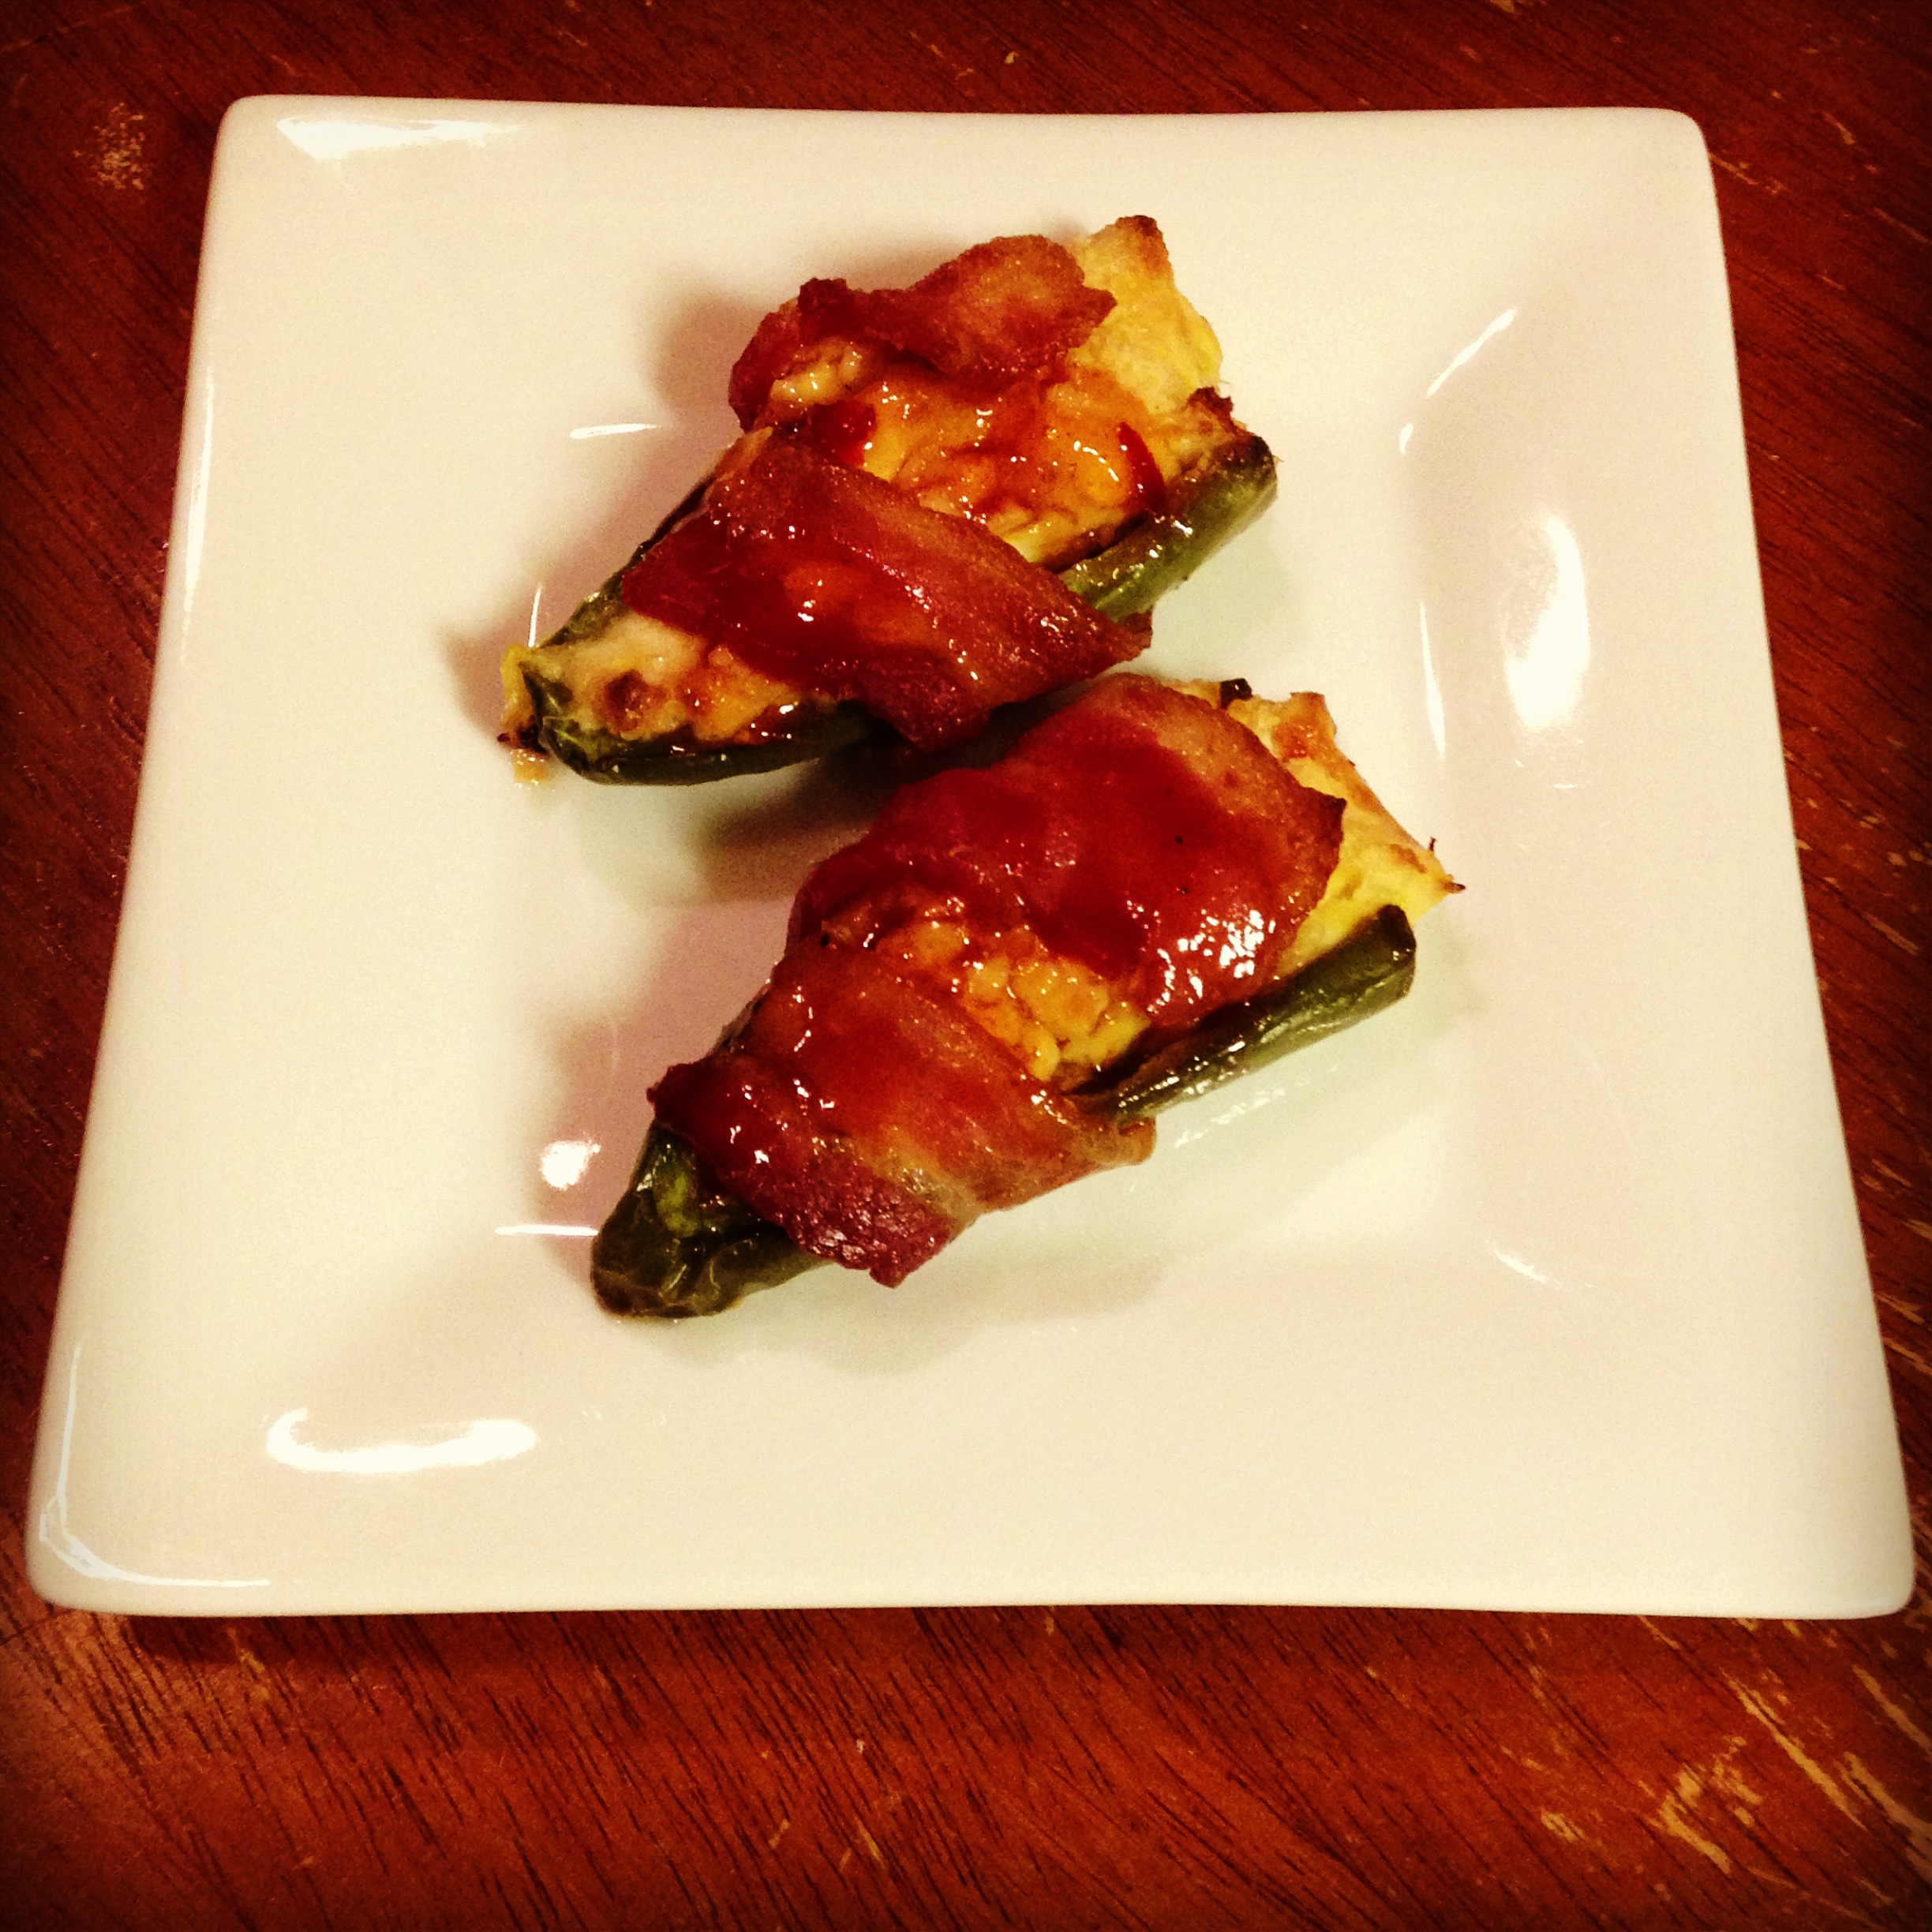 Jalapeno Poppers with Bacon, Pineapple, and Barbeque